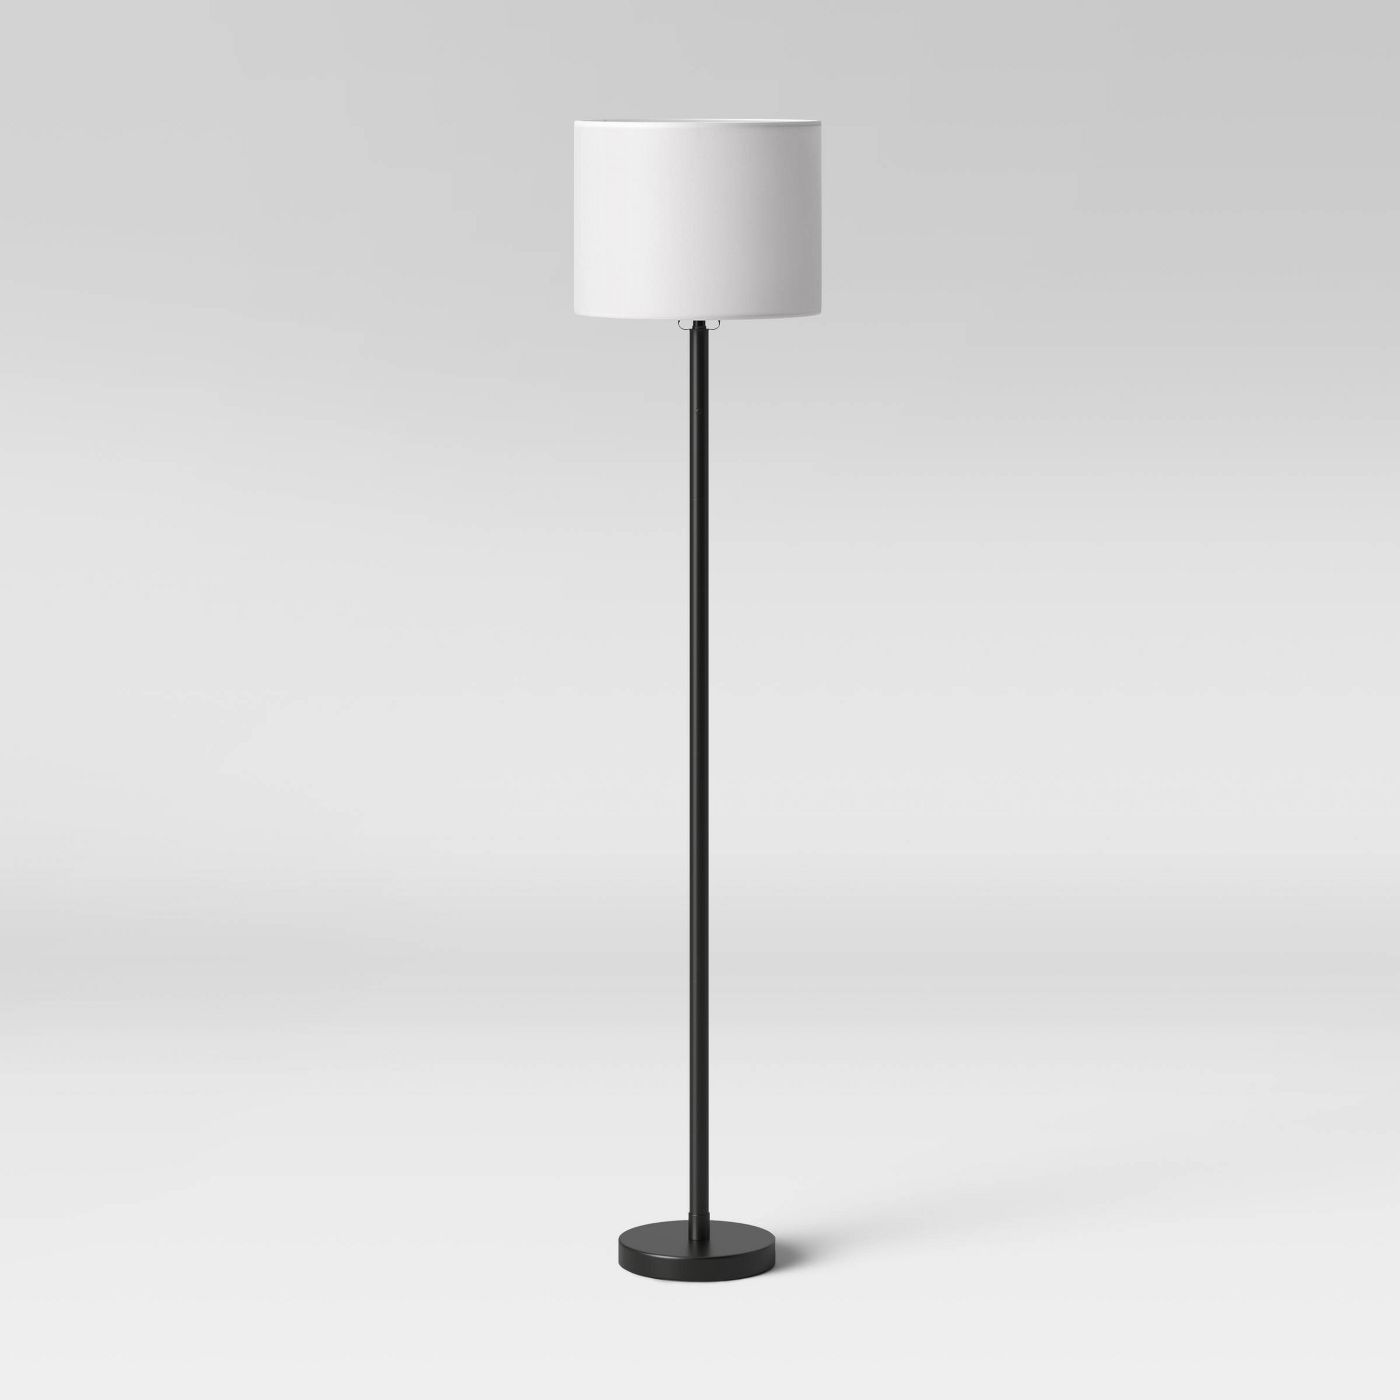 Metal Column Floor Lamp with a Touch Sensor